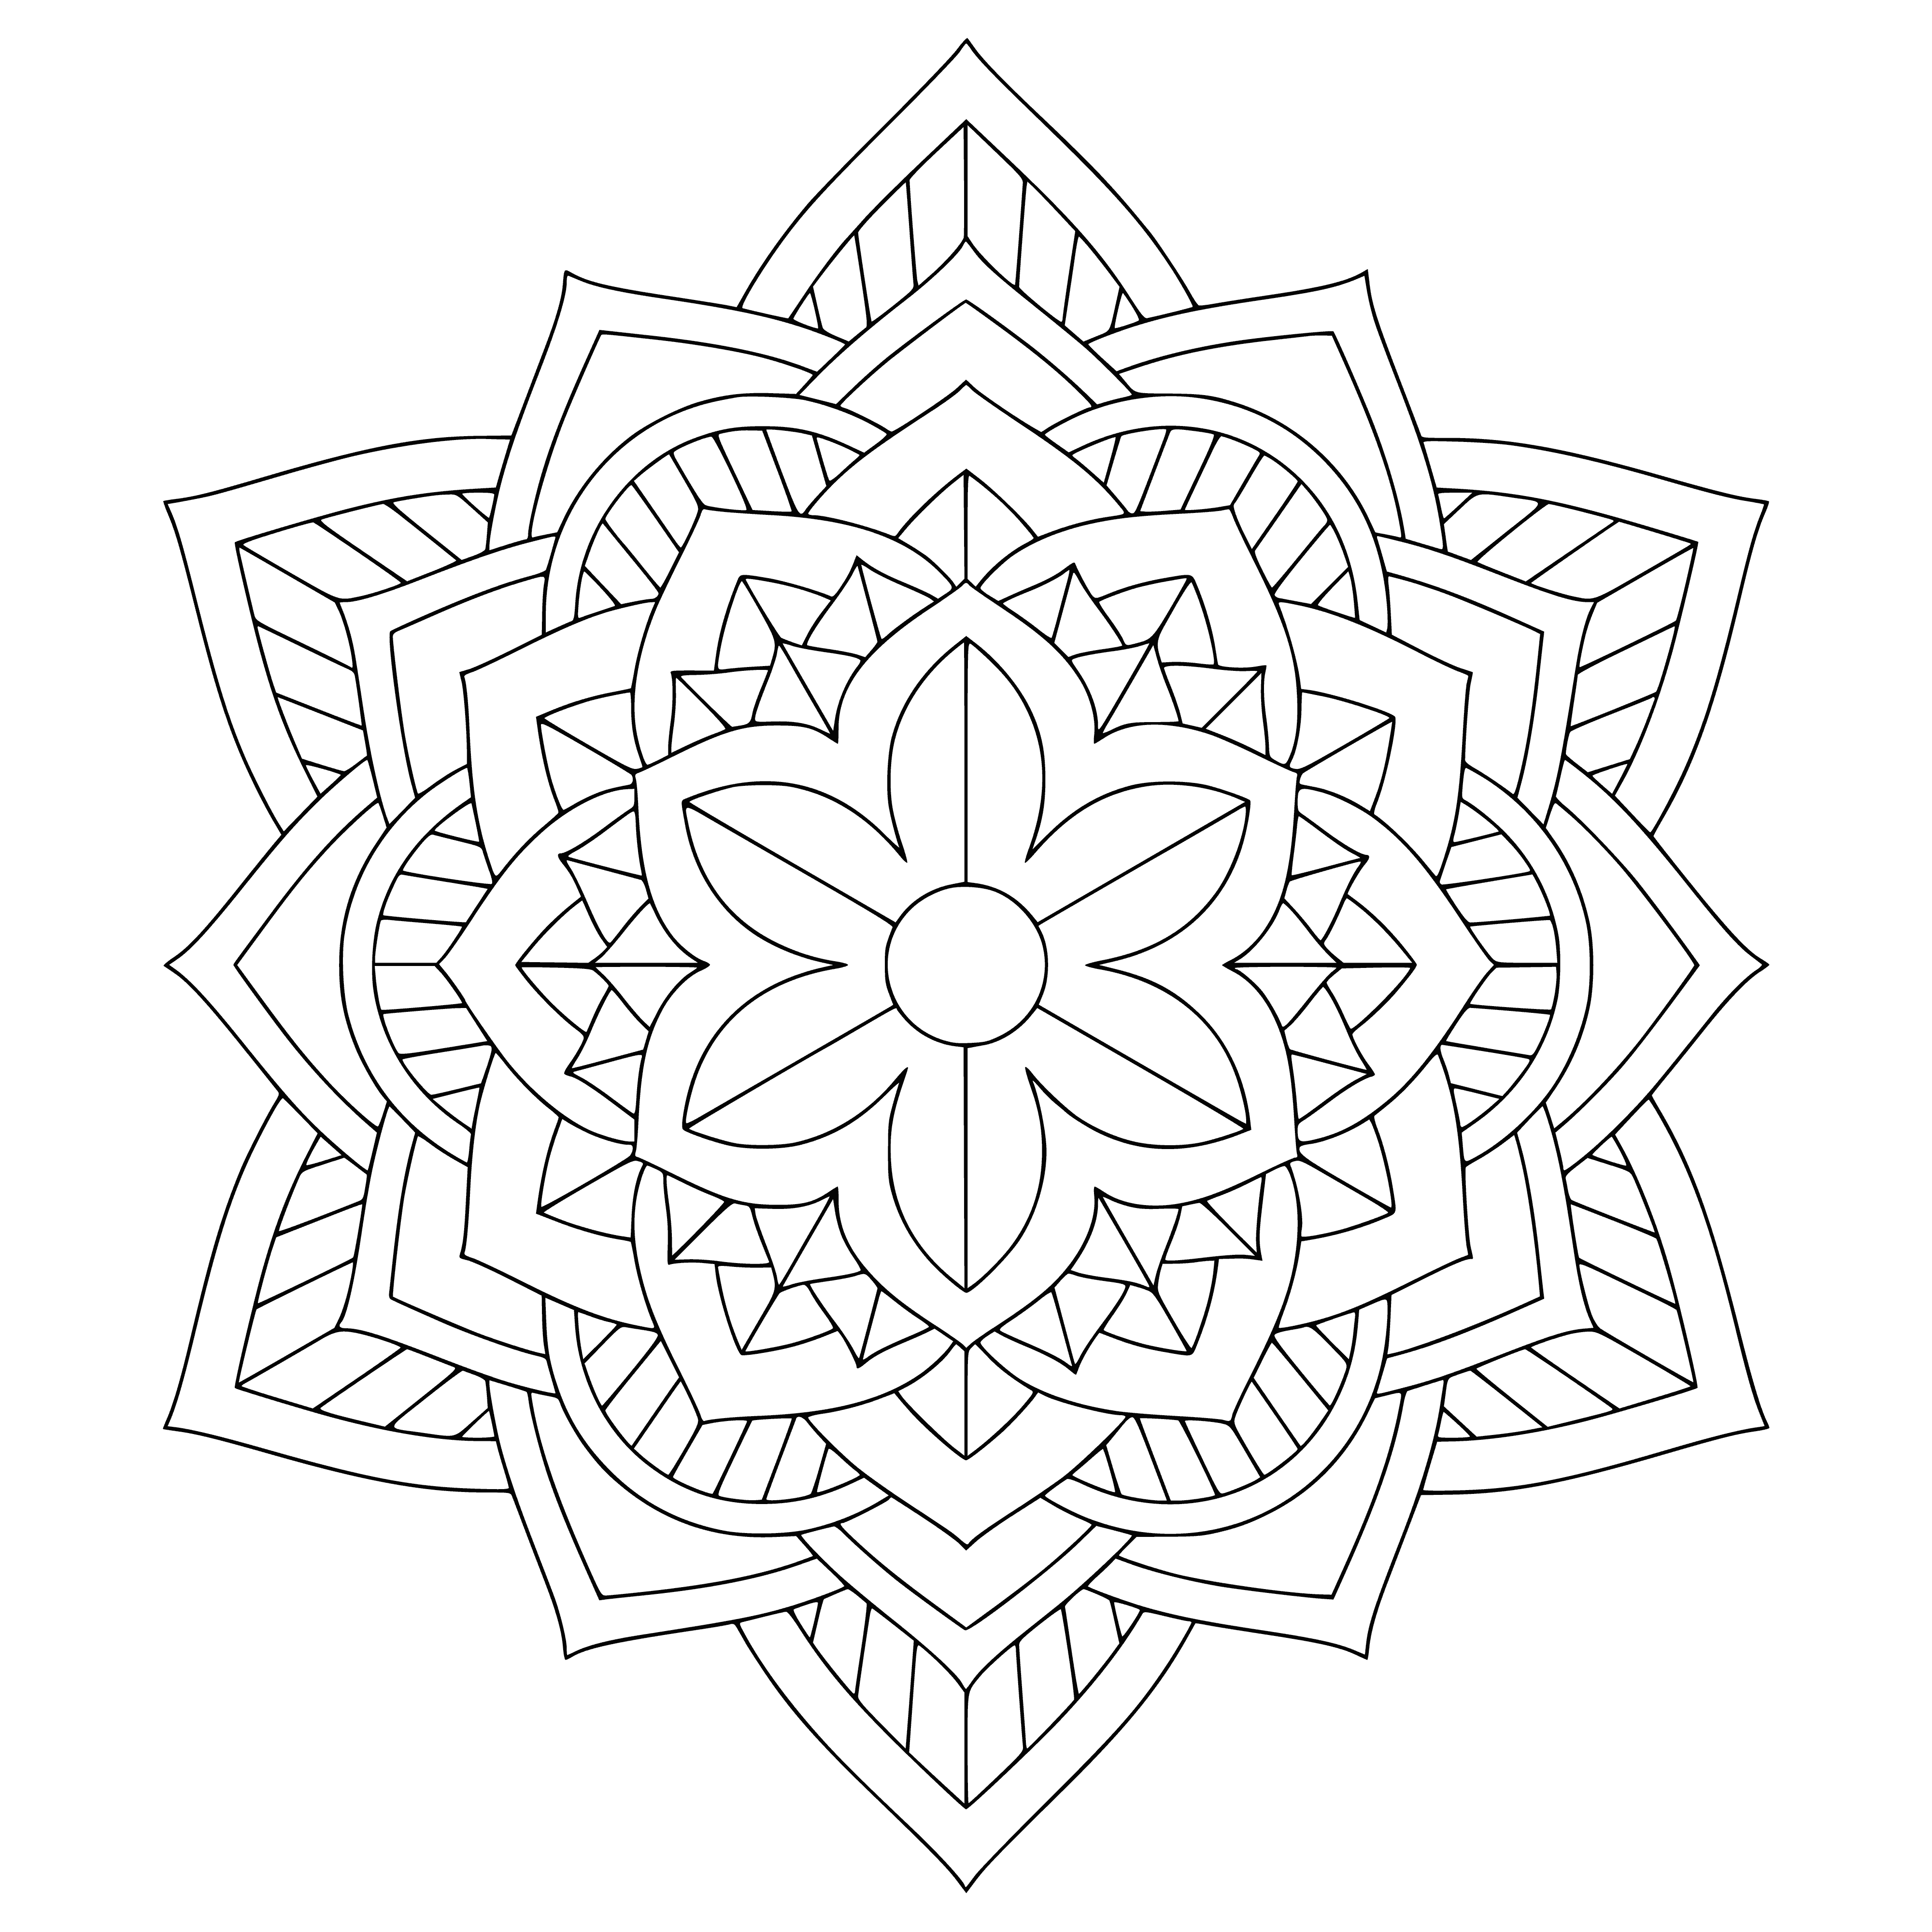 coloring page: Mandala coloring page with beautiful flower design & detailed floral border - perfect for flower lovers & adding beauty to your pages.